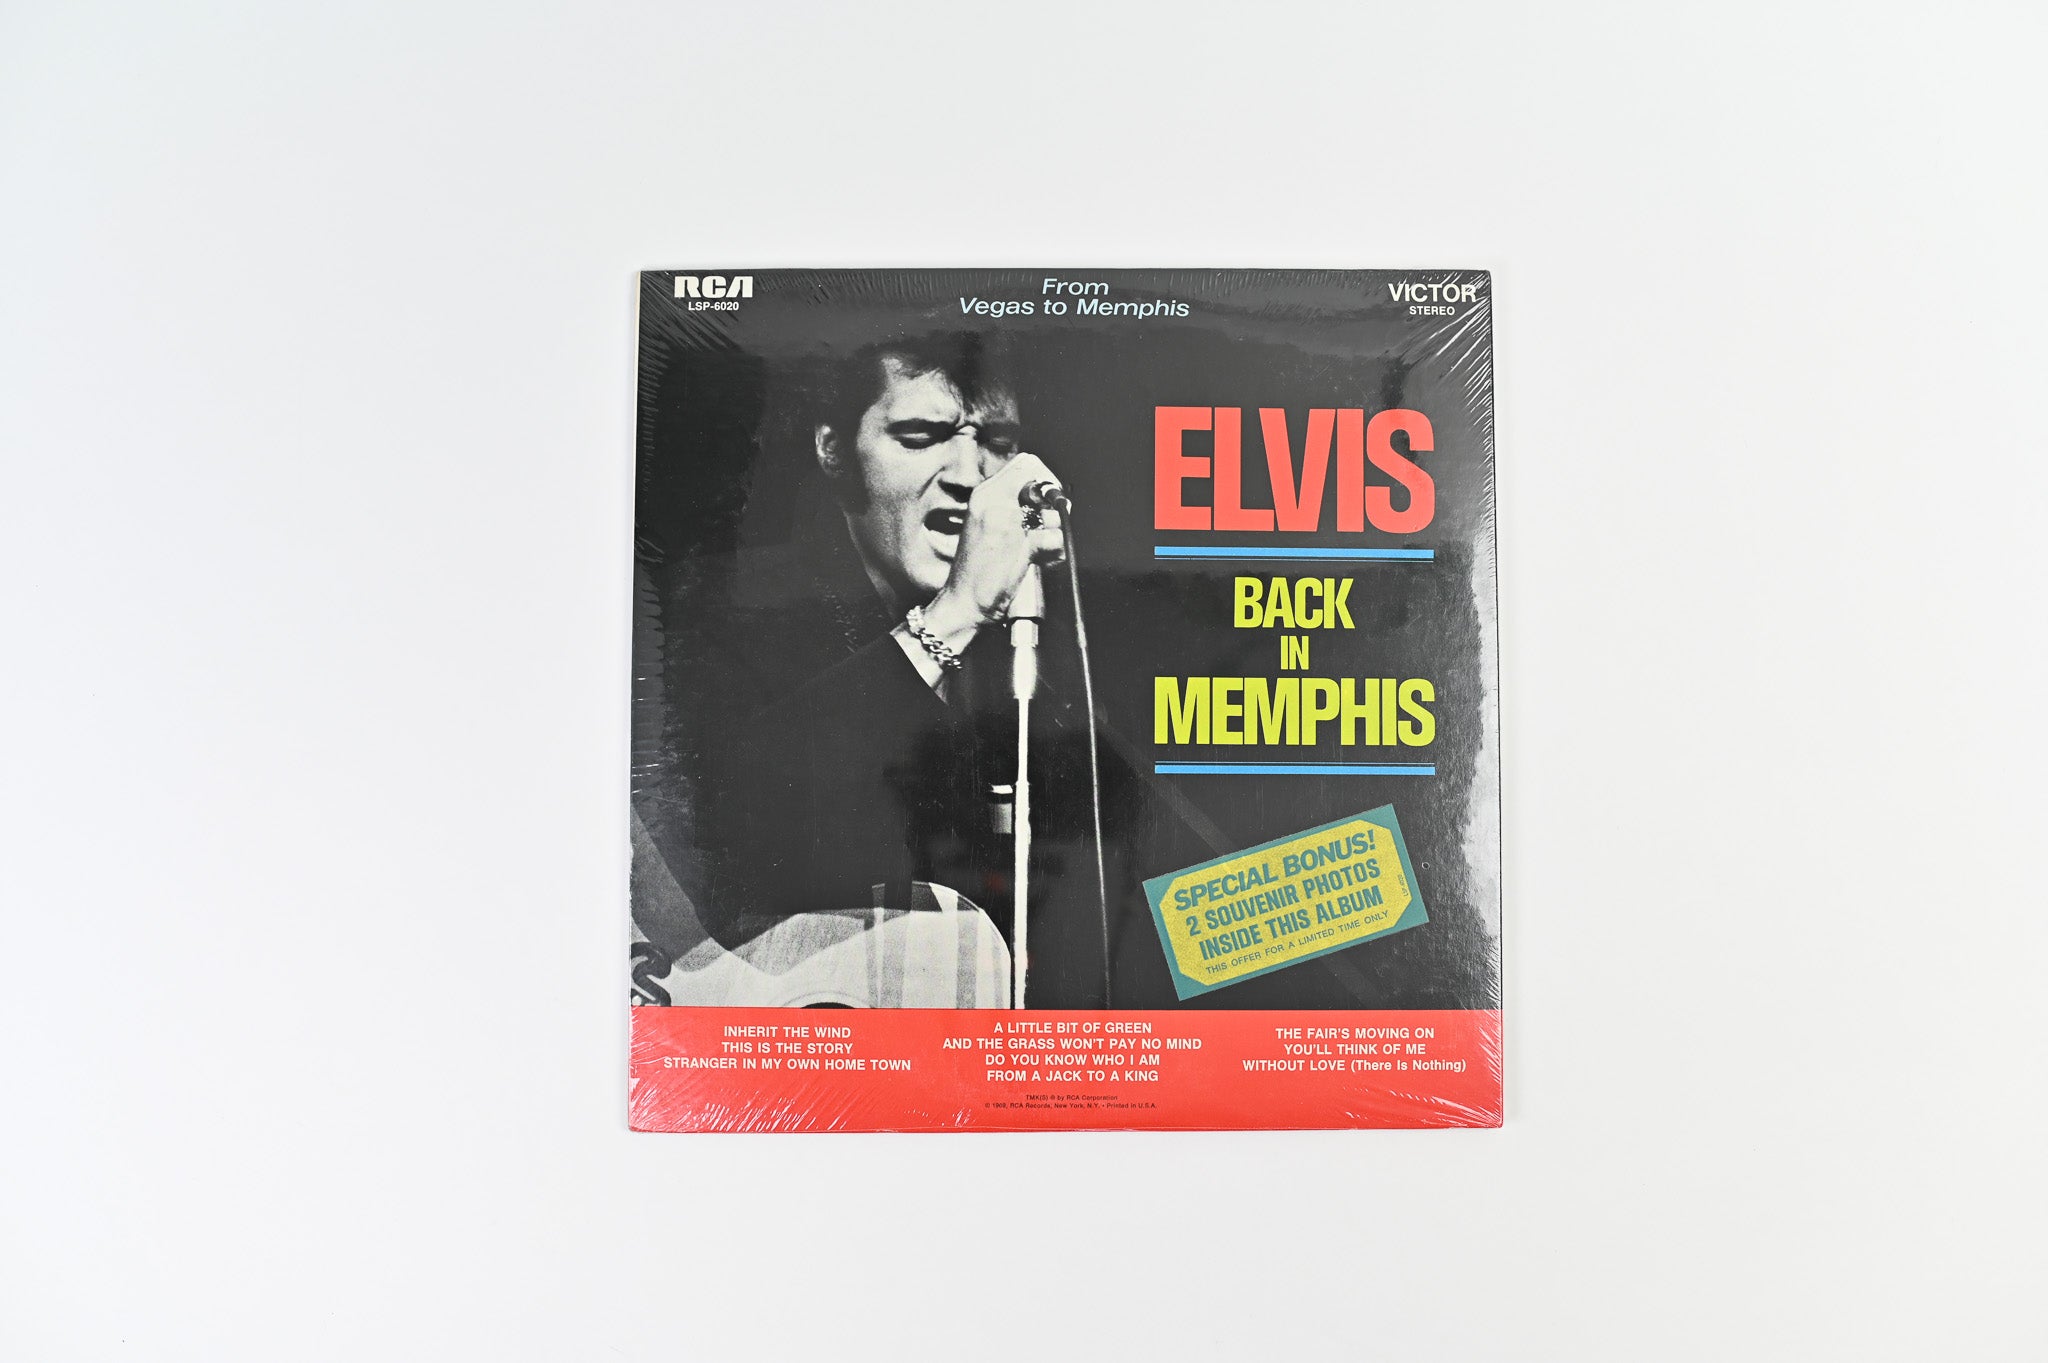 Elvis Presley - From Memphis To Vegas / From Vegas To Memphis on RCA Sealed